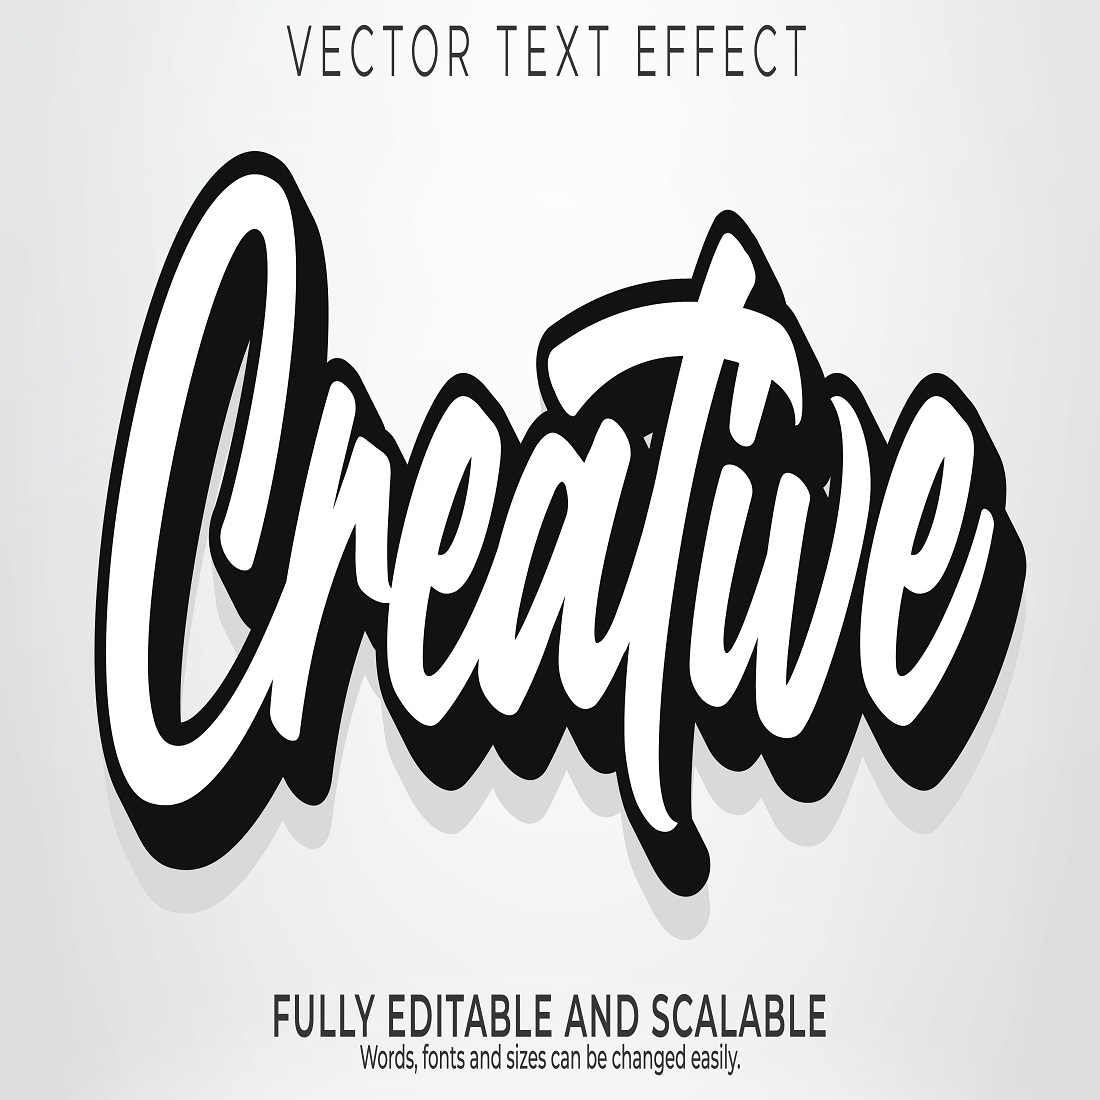 Editable text effect modern 3d creative minimal font style preview image.